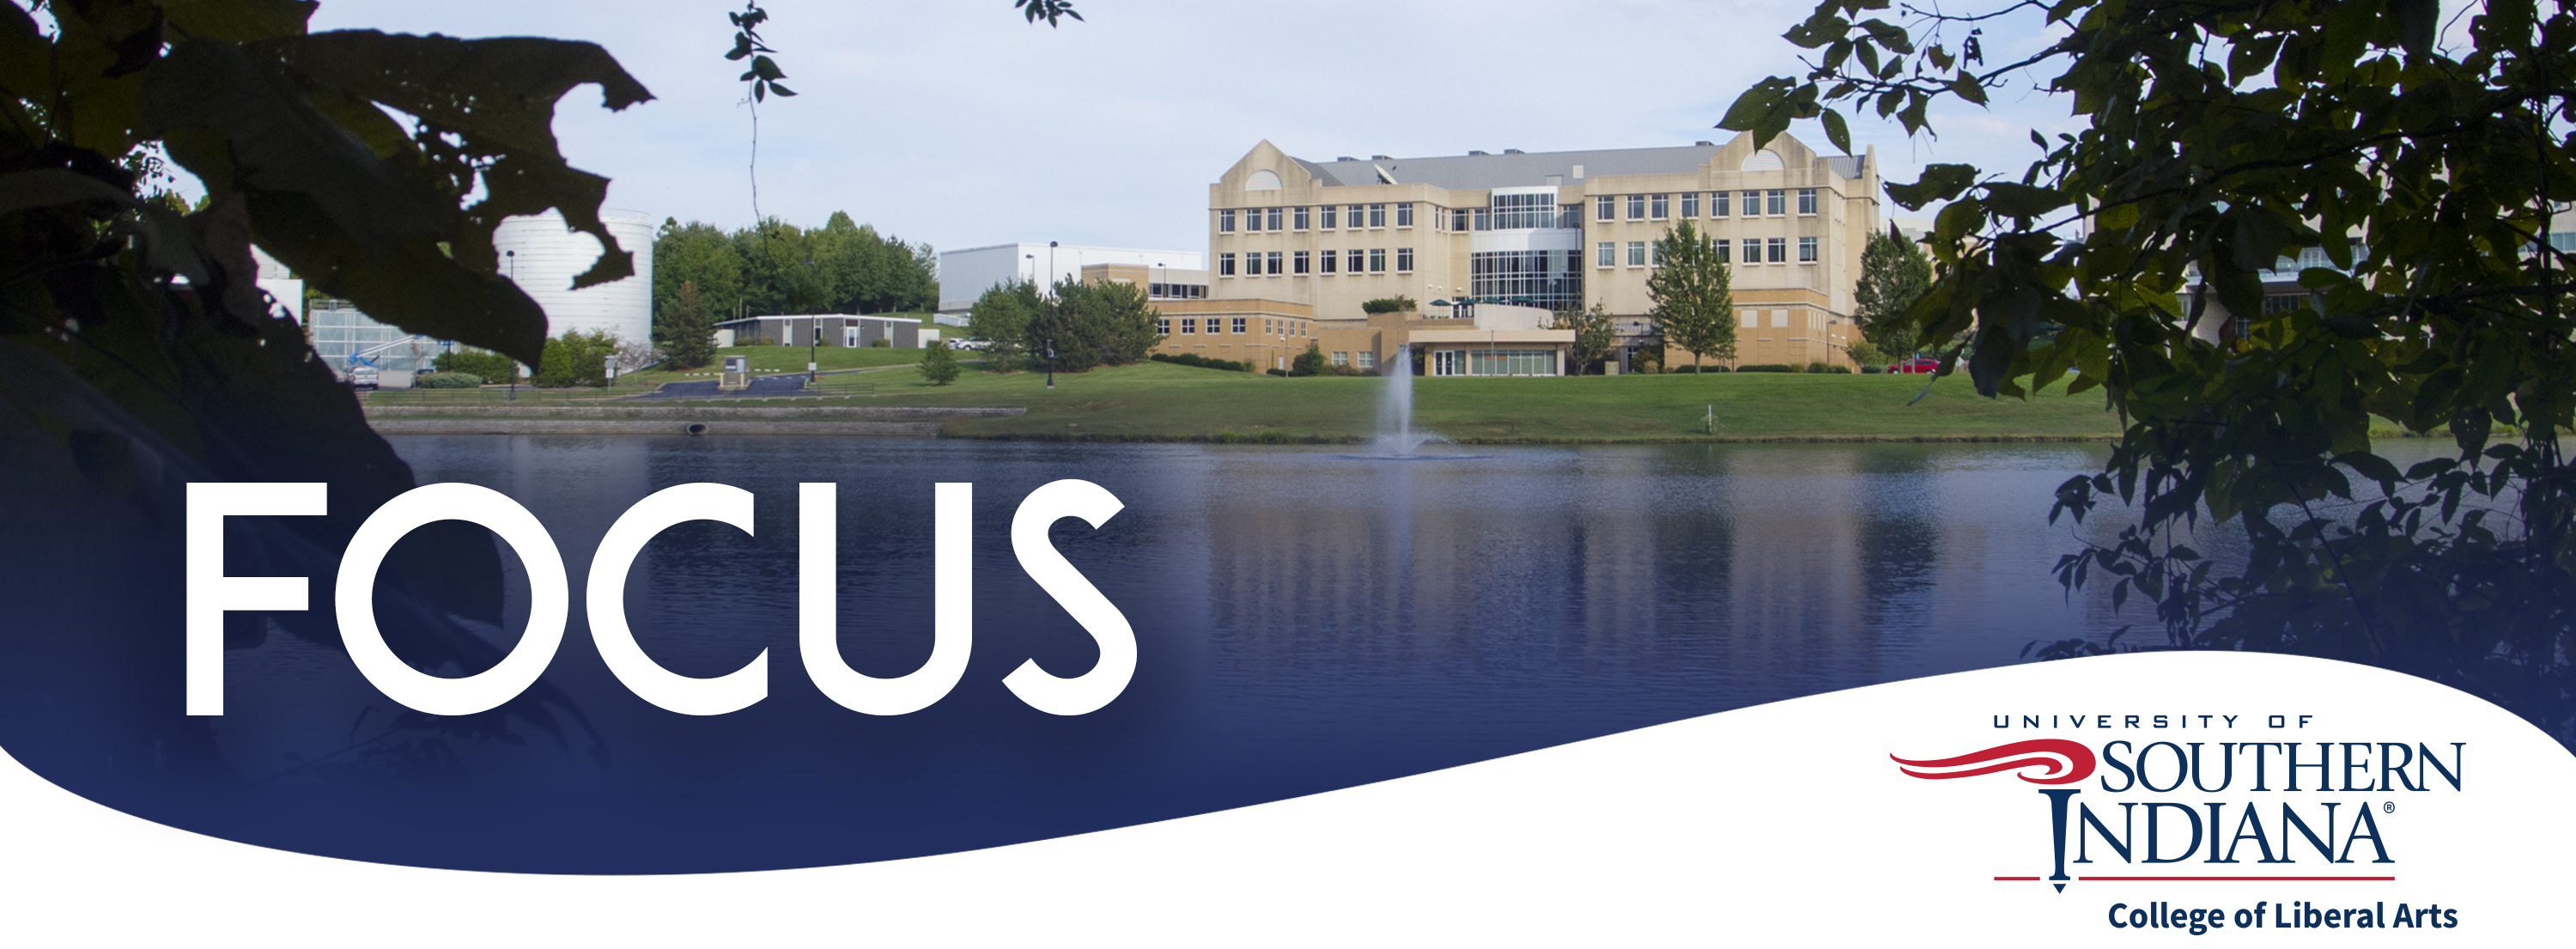 Focus Newsletter header image featuring the Liberal Arts Center across from Reflection Lake